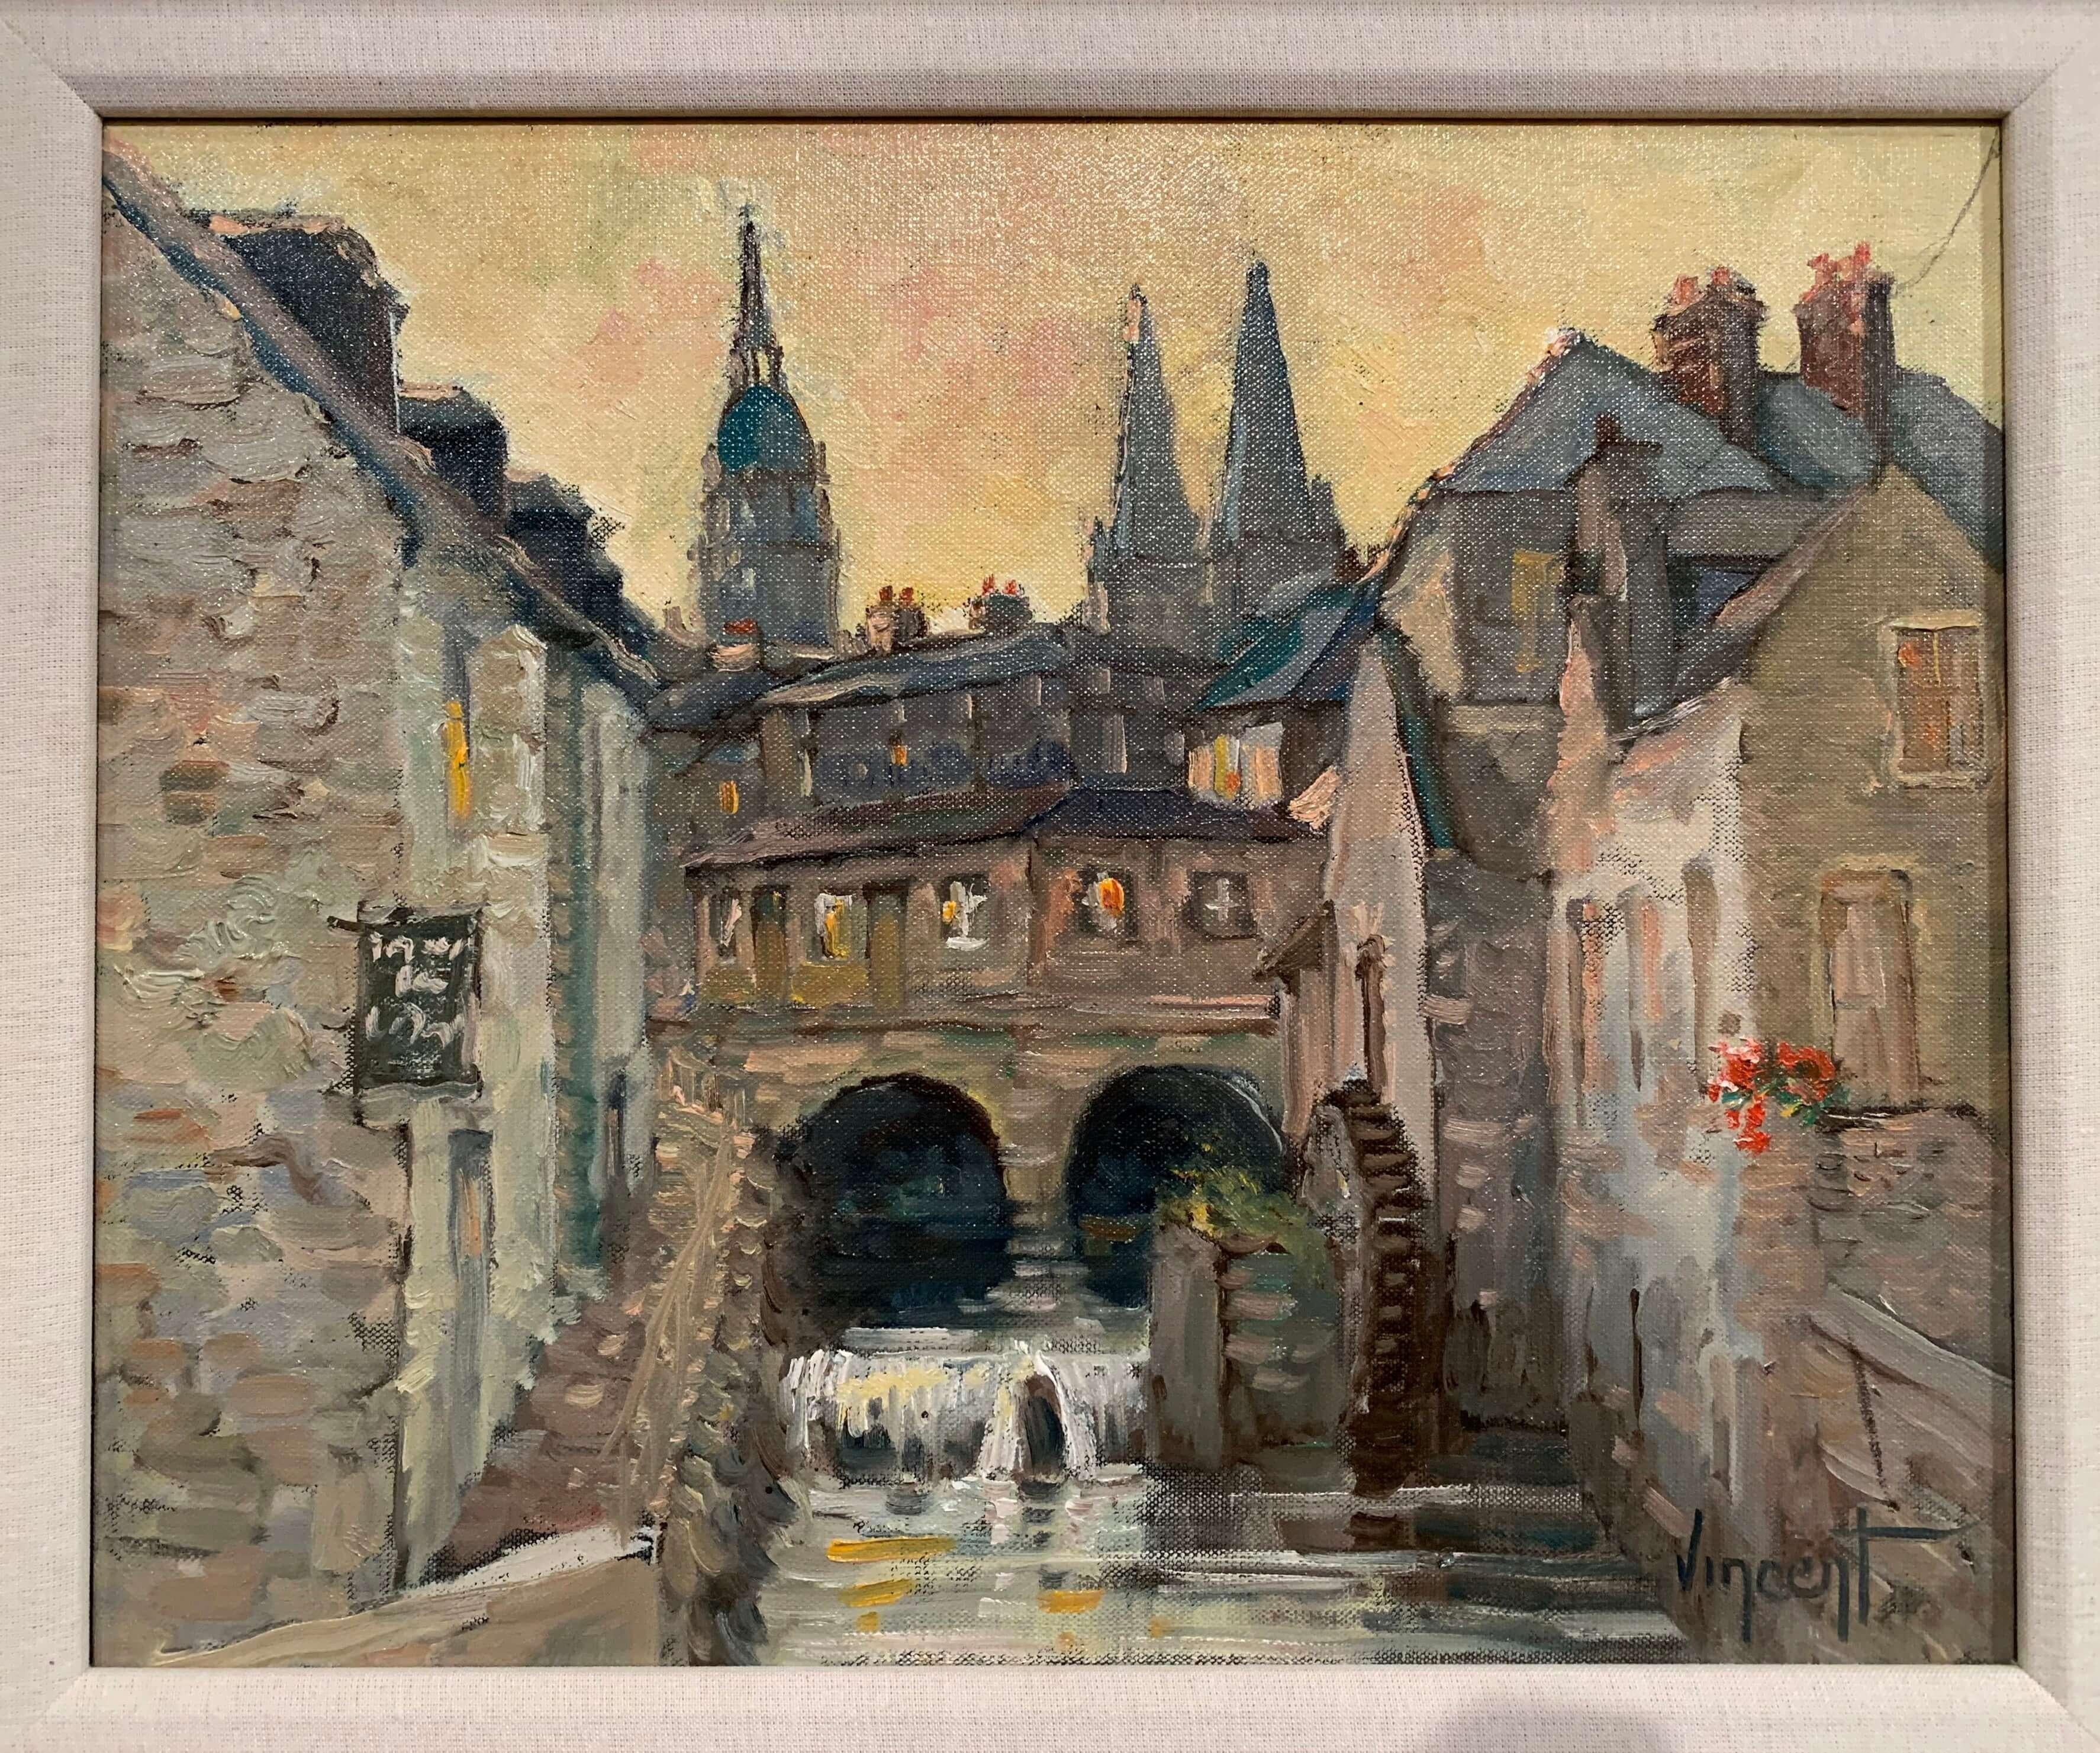 This French oil on canvas painting depicts an old mill in the city of Bayeux, Normandy. Set inside a carved, gilt frame, the composition exemplifies how architecture can be rendered in a painterly, impressionist style. The art work is signed in the